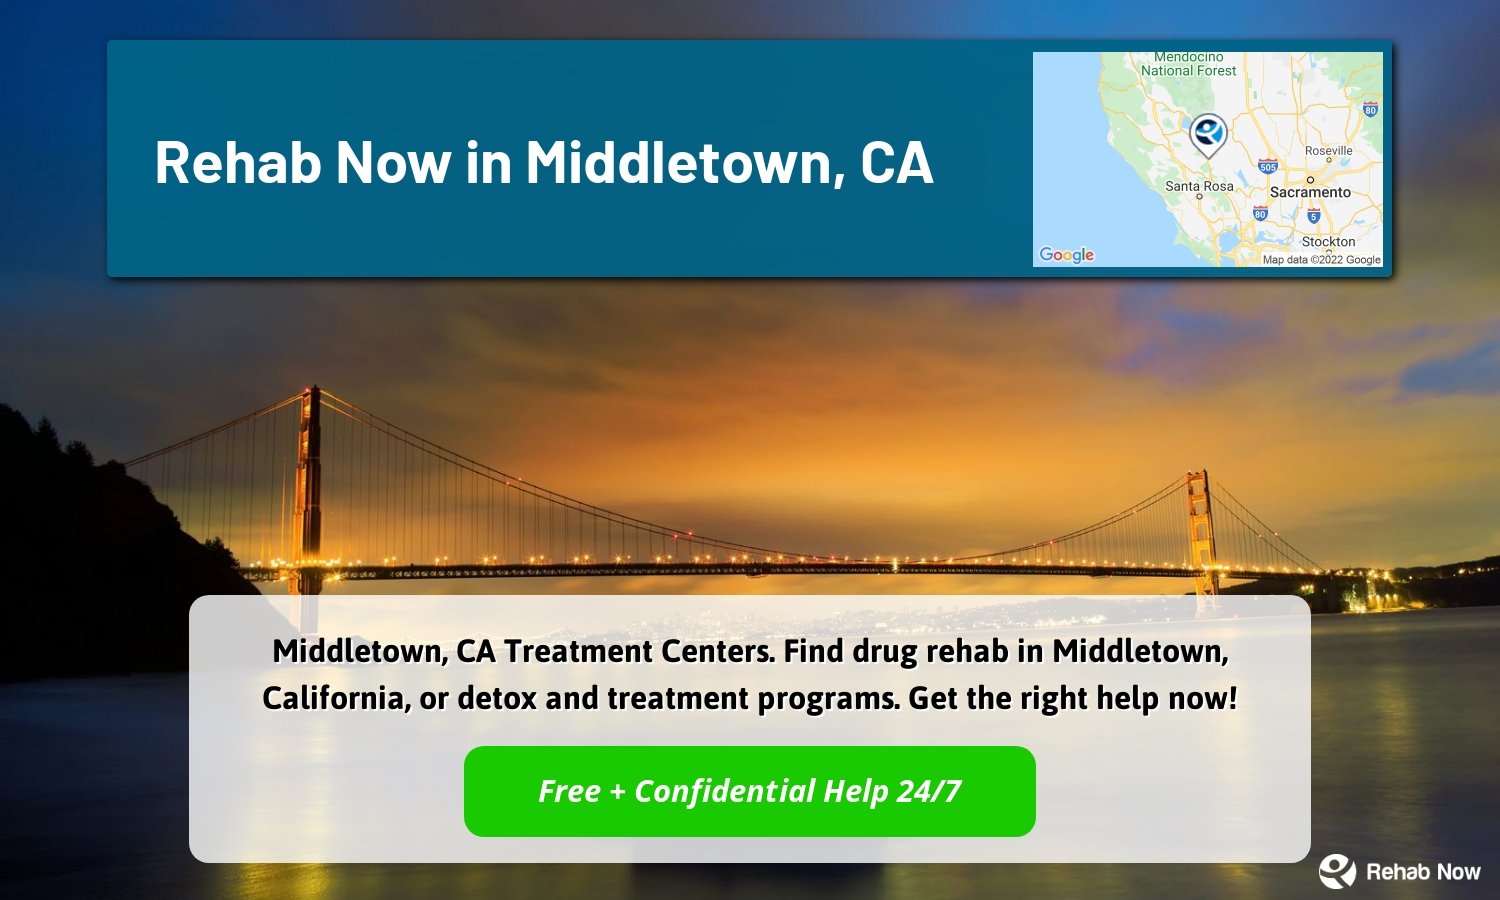 Middletown, CA Treatment Centers. Find drug rehab in Middletown, California, or detox and treatment programs. Get the right help now!